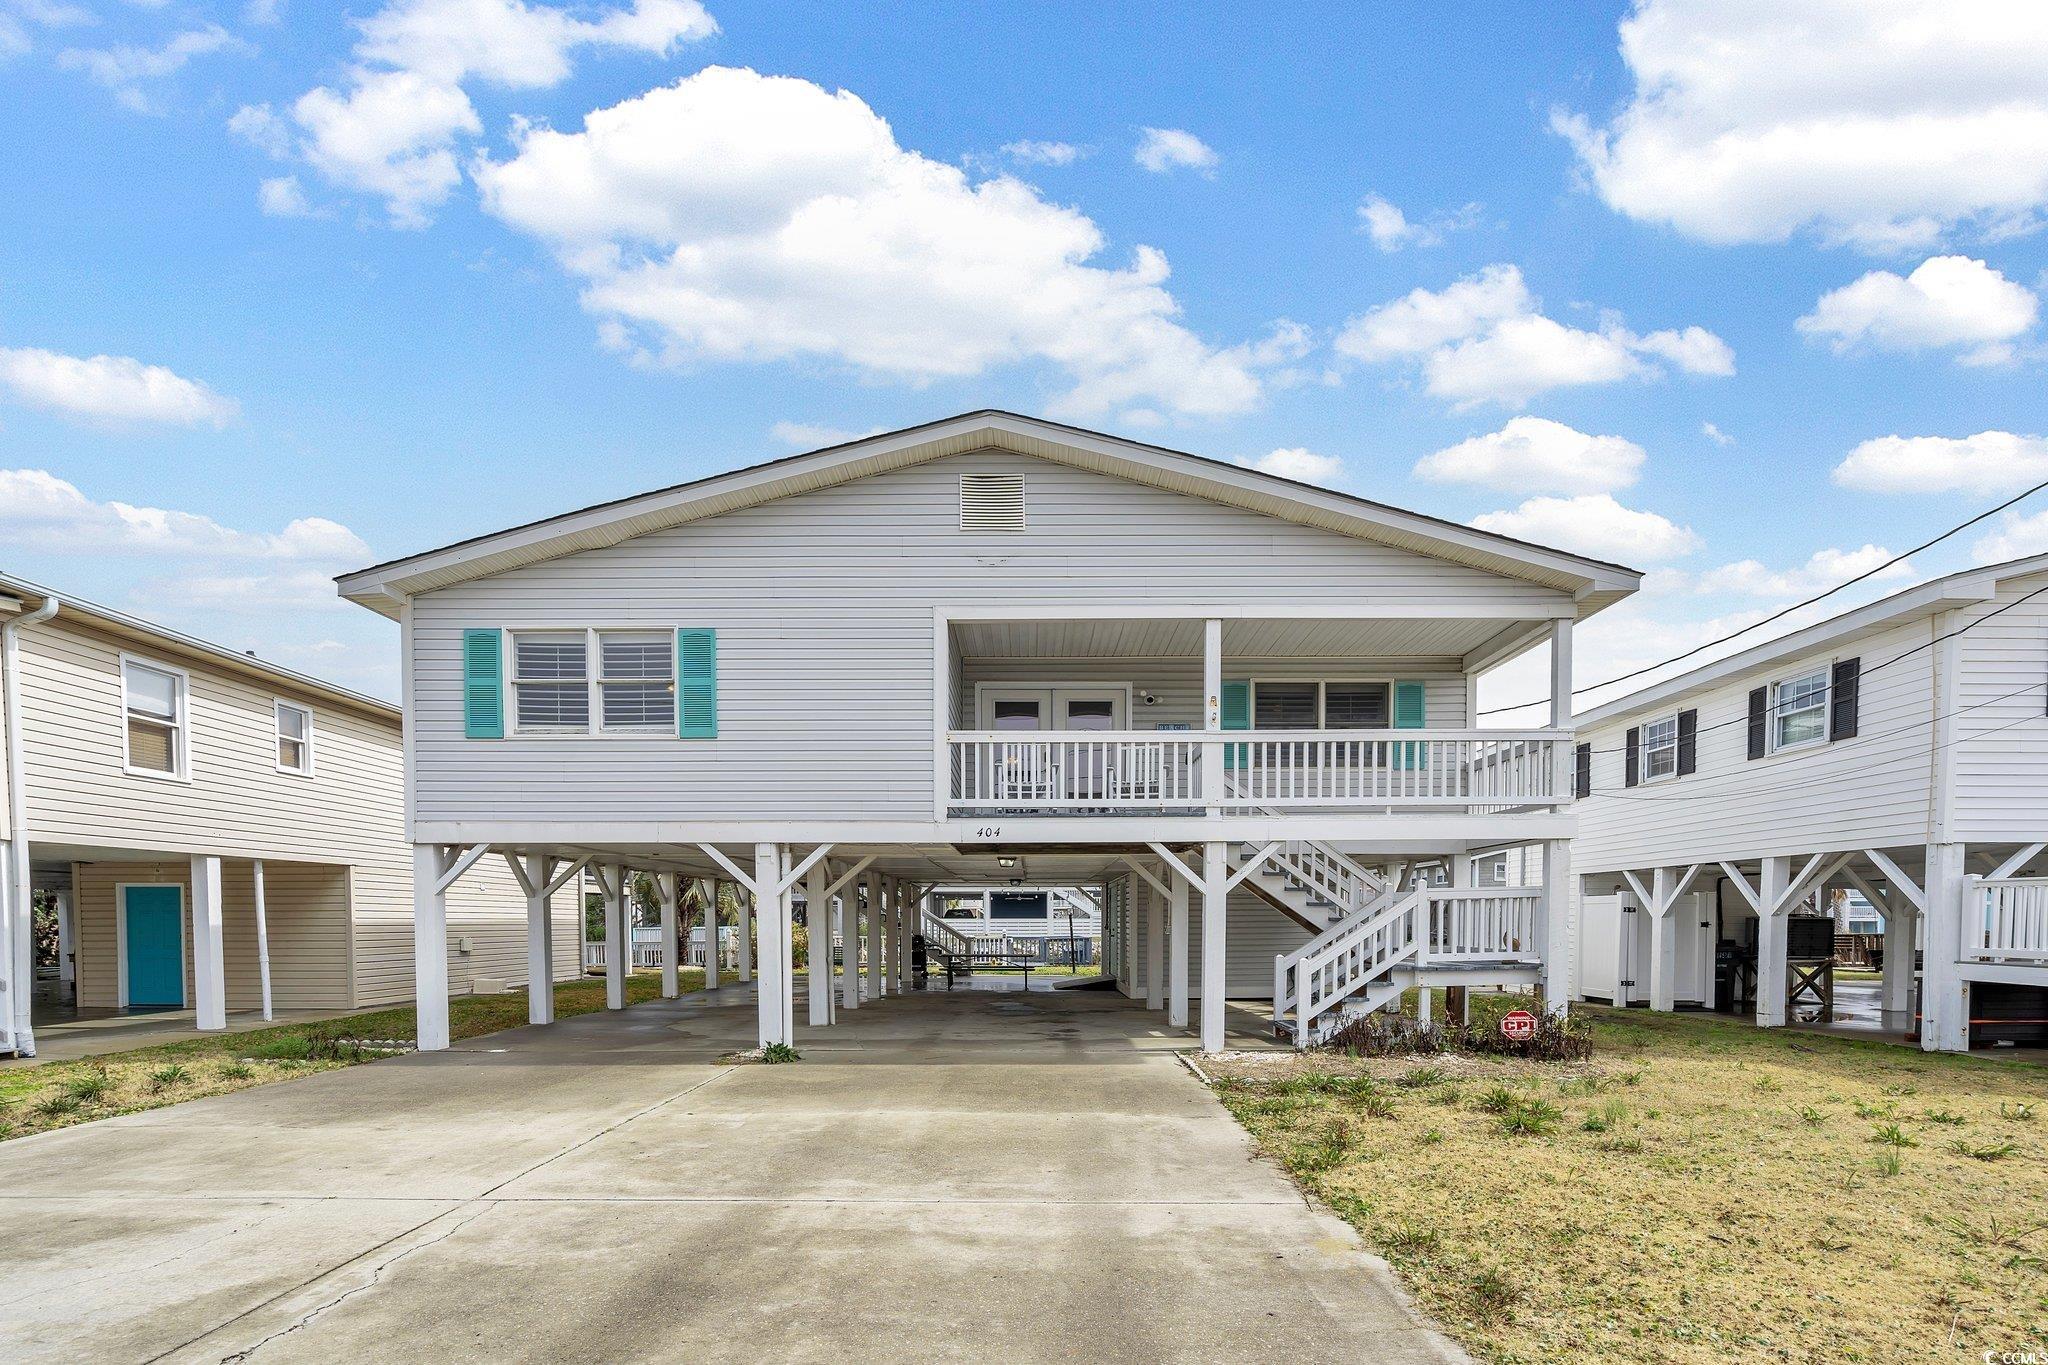 open house!!  may 10th, 2024 from 11am-2pm.  this is a great opportunity to come see this cherry grove channel home that is a rental machine and typically hard to get in to see!  this is the perfect home, second home or airbnb!  nestled along a channel in cherry grove beach, you have gorgeous views of the water.   the serene backyard is ideal for fishing, crabbing and kayaking and is big enough to accommodate a pool.  this raised beach home boasts 4 bedrooms and 3 full baths including a spacious master bedroom with private on suite bath.  one of the best features of this home is the location!  just .3 miles from the beach and .4 miles from the cherry grove fishing pier!  just .5 miles from sea mountain highway which has many shops and restaurants for you to enjoy.  updated, fully furnished and perfectly decorated for a 5 star airbnb, this home is completely turn key!  there are two locked owners closets so your personal items can be conveniently enjoyed when you visit.  below the home is an outdoor shower and storage space for a golf cart and all of your beach gear.  there is also a private fishing dock right out back.  you will love that the roof was installed in 2016, hvac in 2017 and water heater in 2022.  be sure to check out the immersive 3d tour and don’t miss out on this gem!  don't wait! - schedule a showing before this gorgeous home is sold!